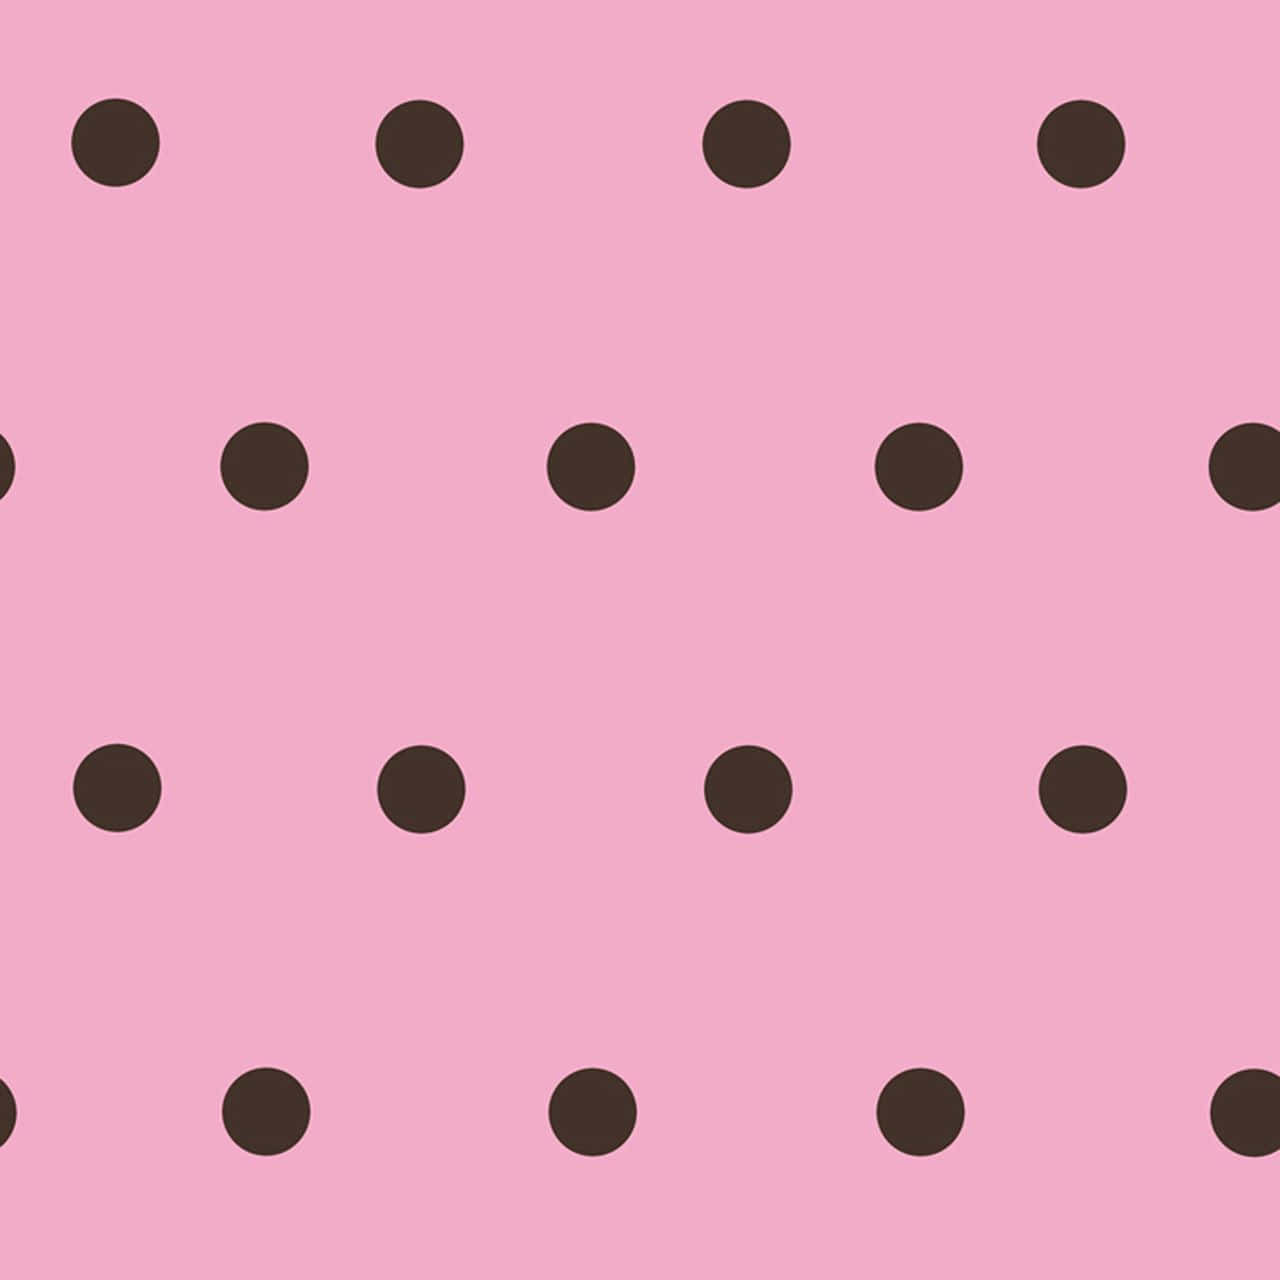 Bright and Bold Pink Polka Dot Background